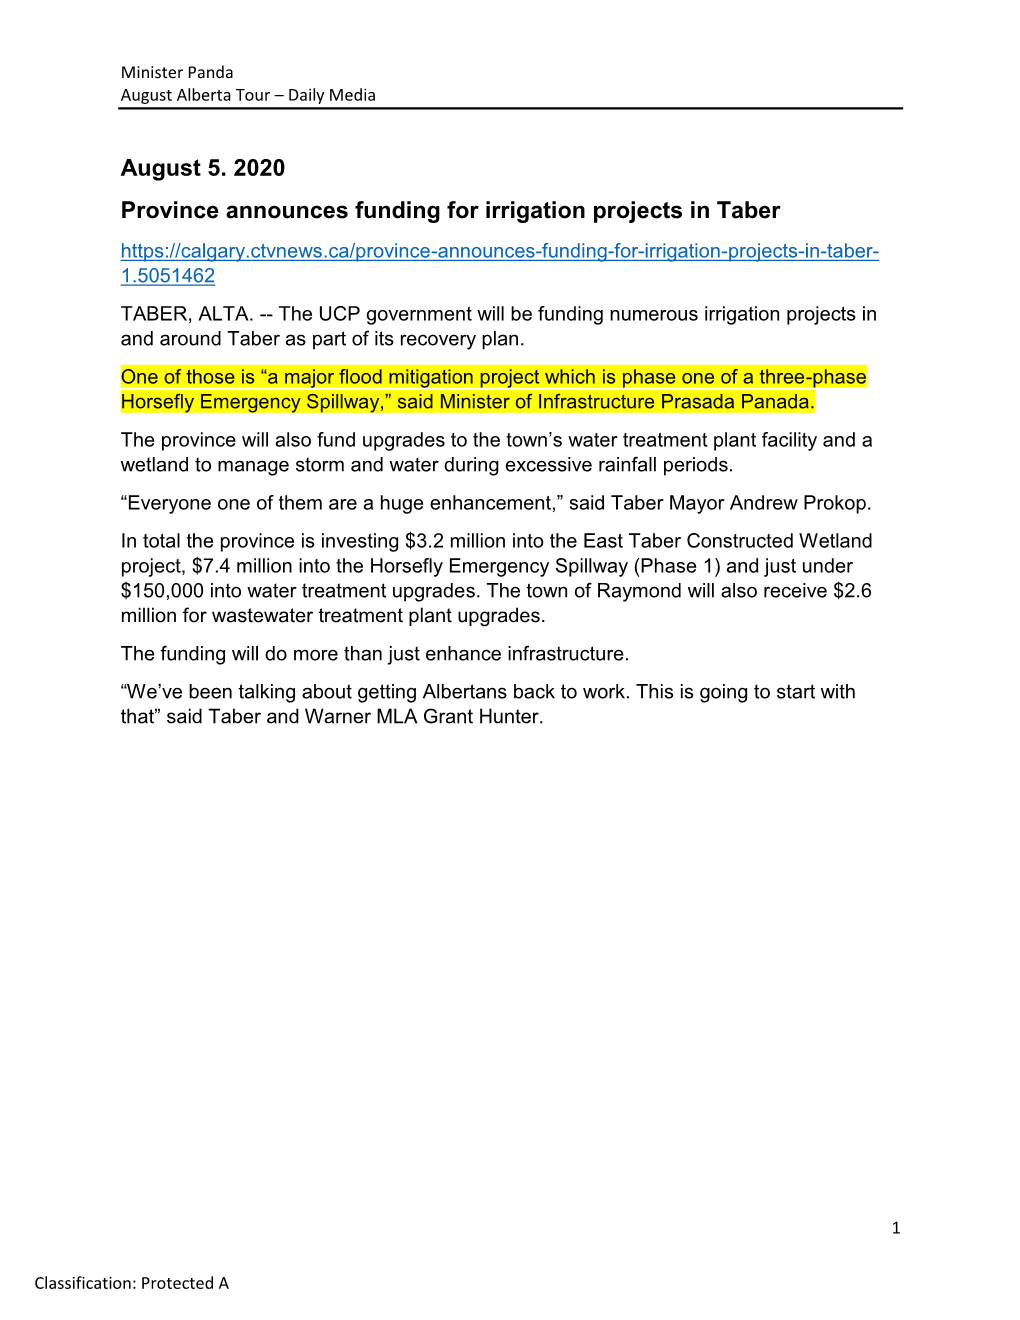 August 5. 2020 Province Announces Funding for Irrigation Projects in Taber